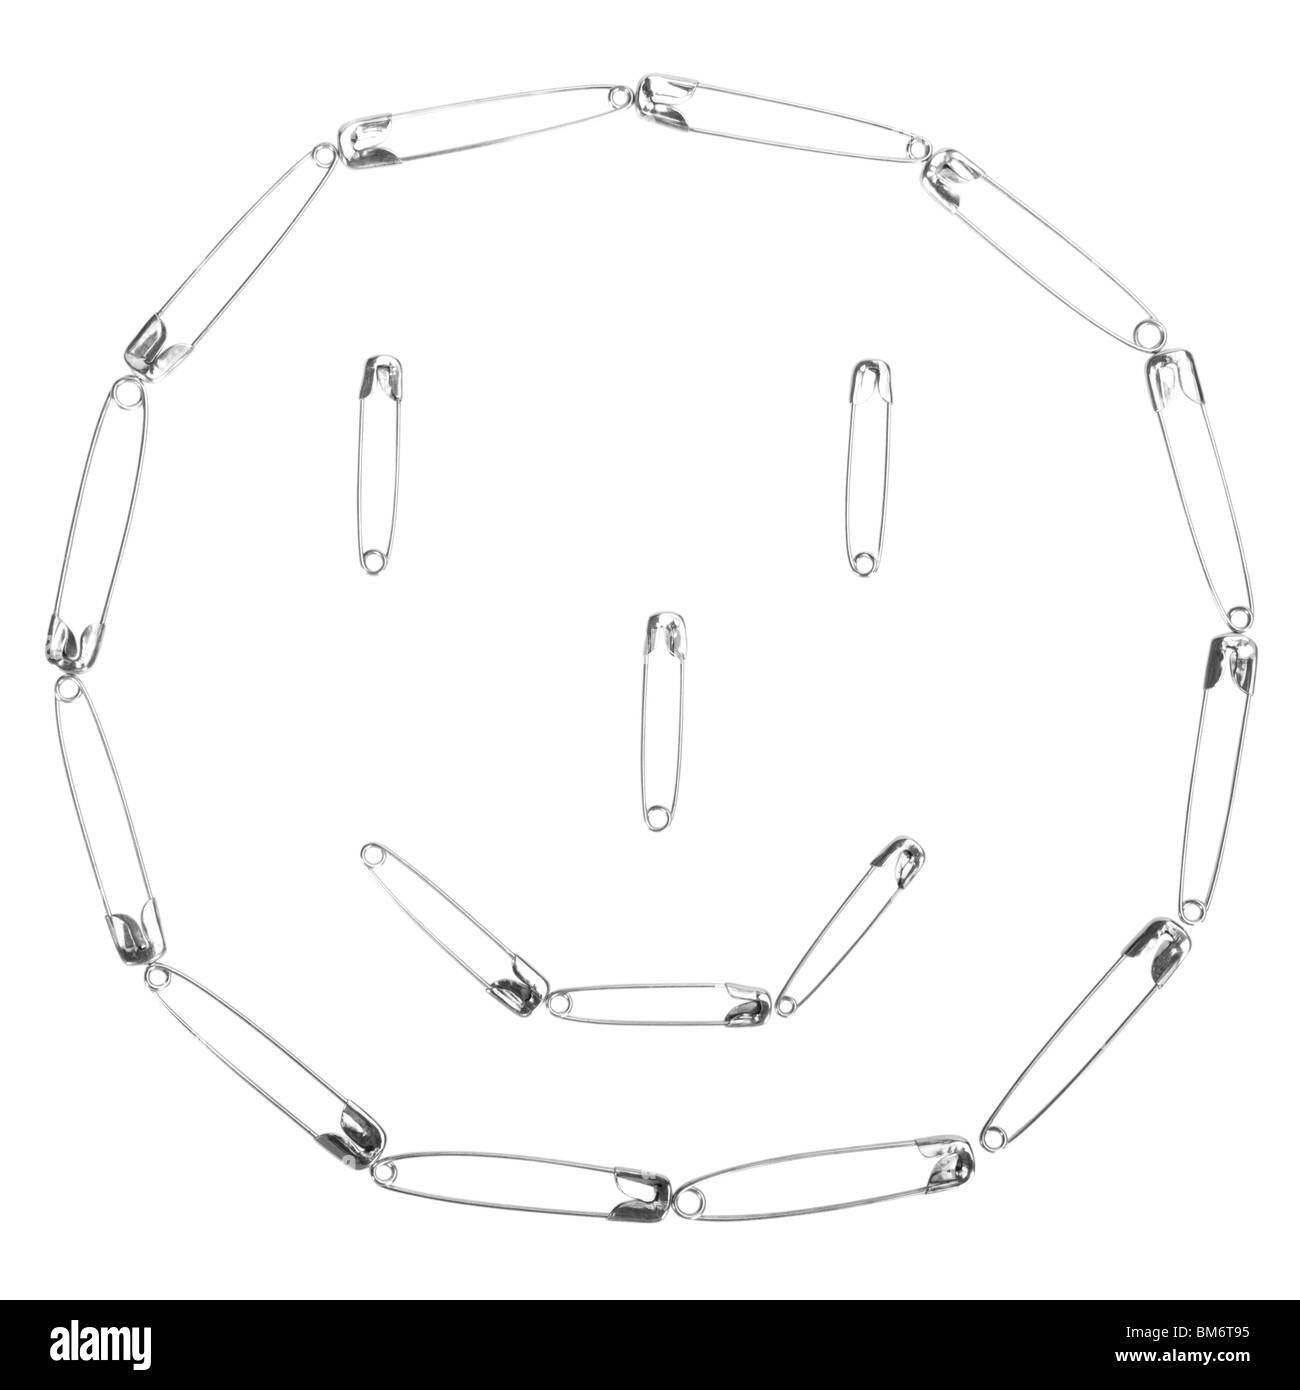 Smiley face made of safety pins Stock Photo